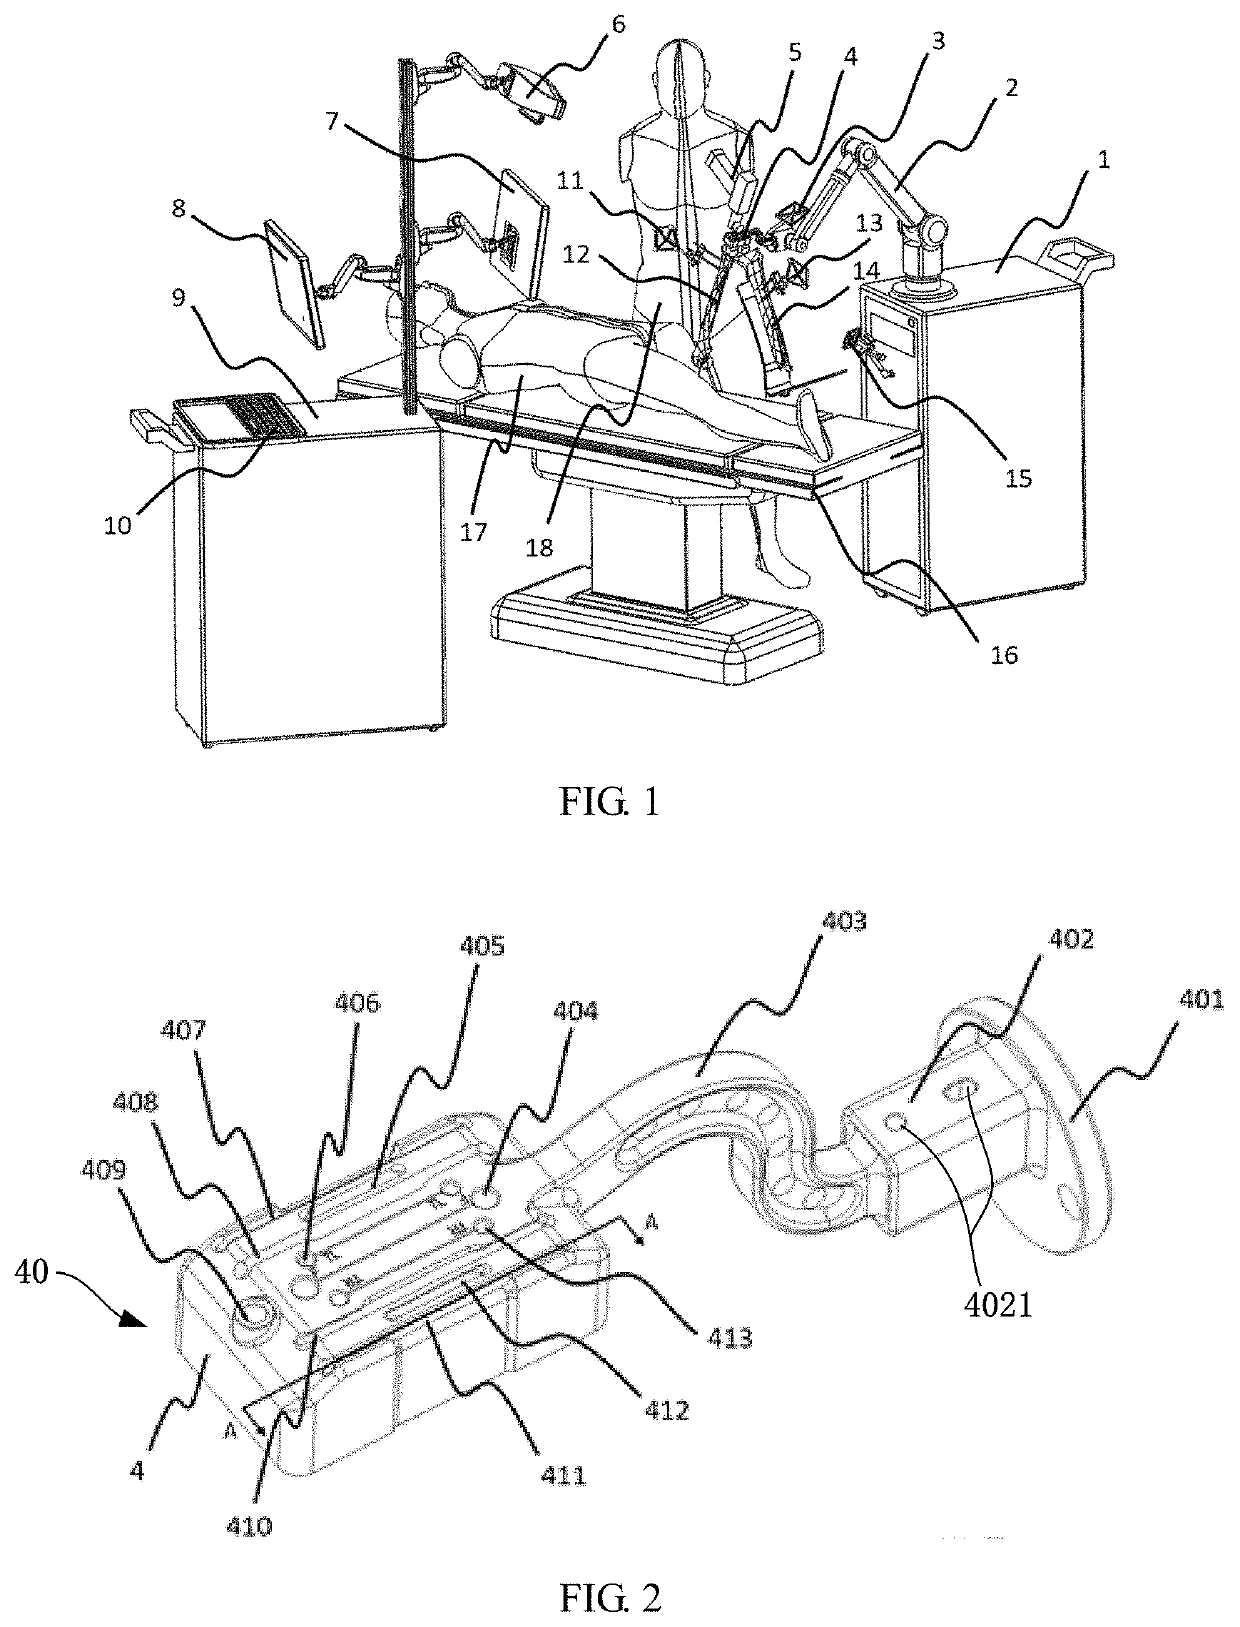 Position correction method of osteotomy guide tool and orthopedic surgical system